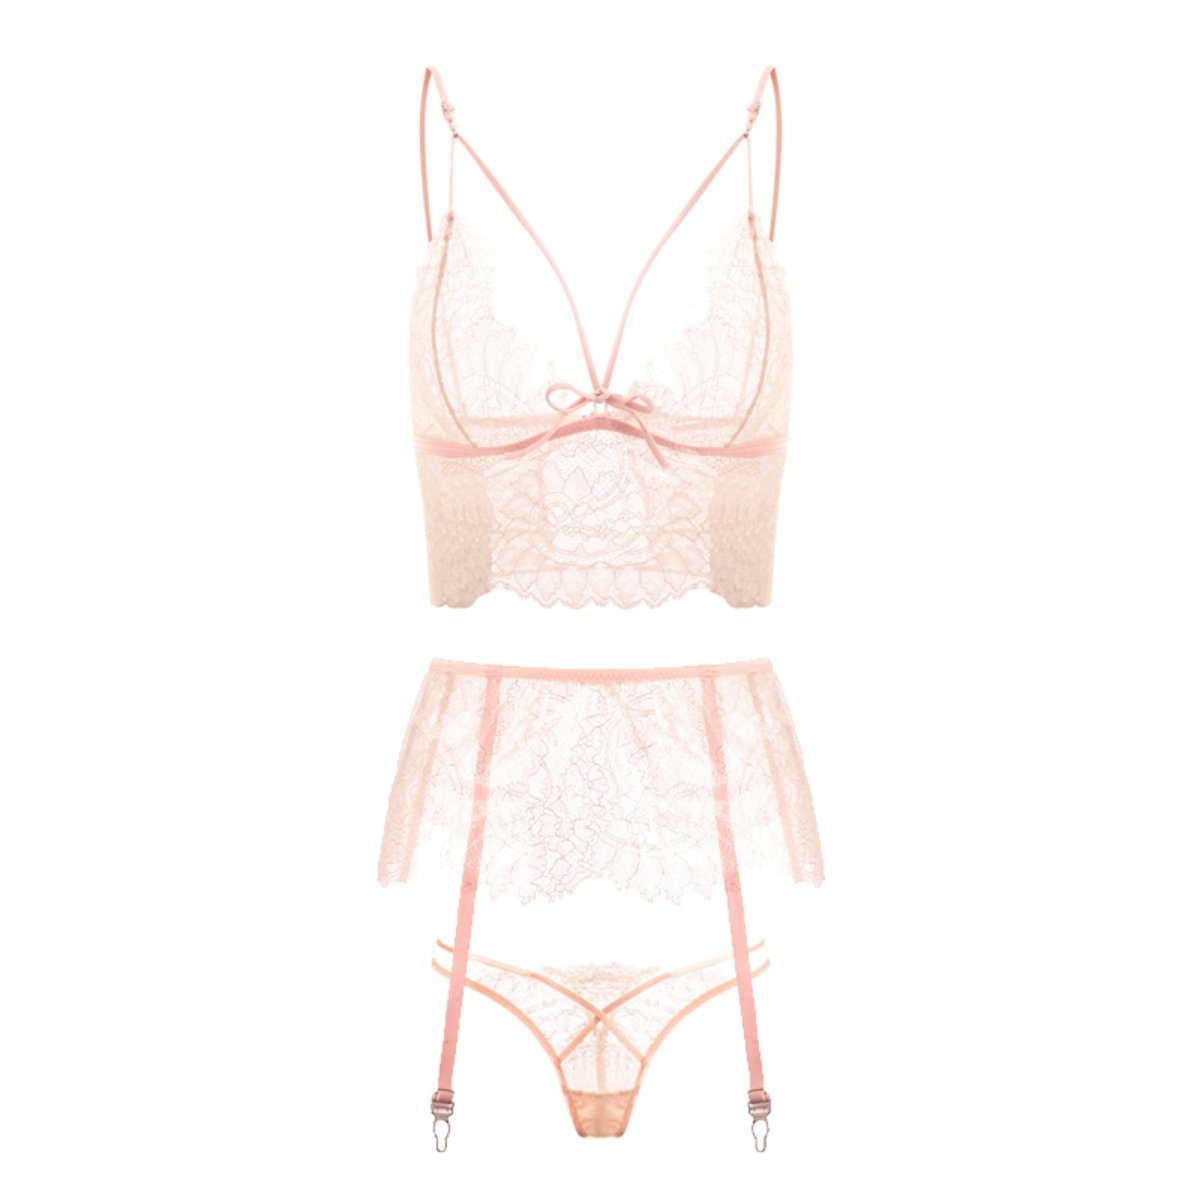 Polly lingerie set Intimates LOVEFREYA 